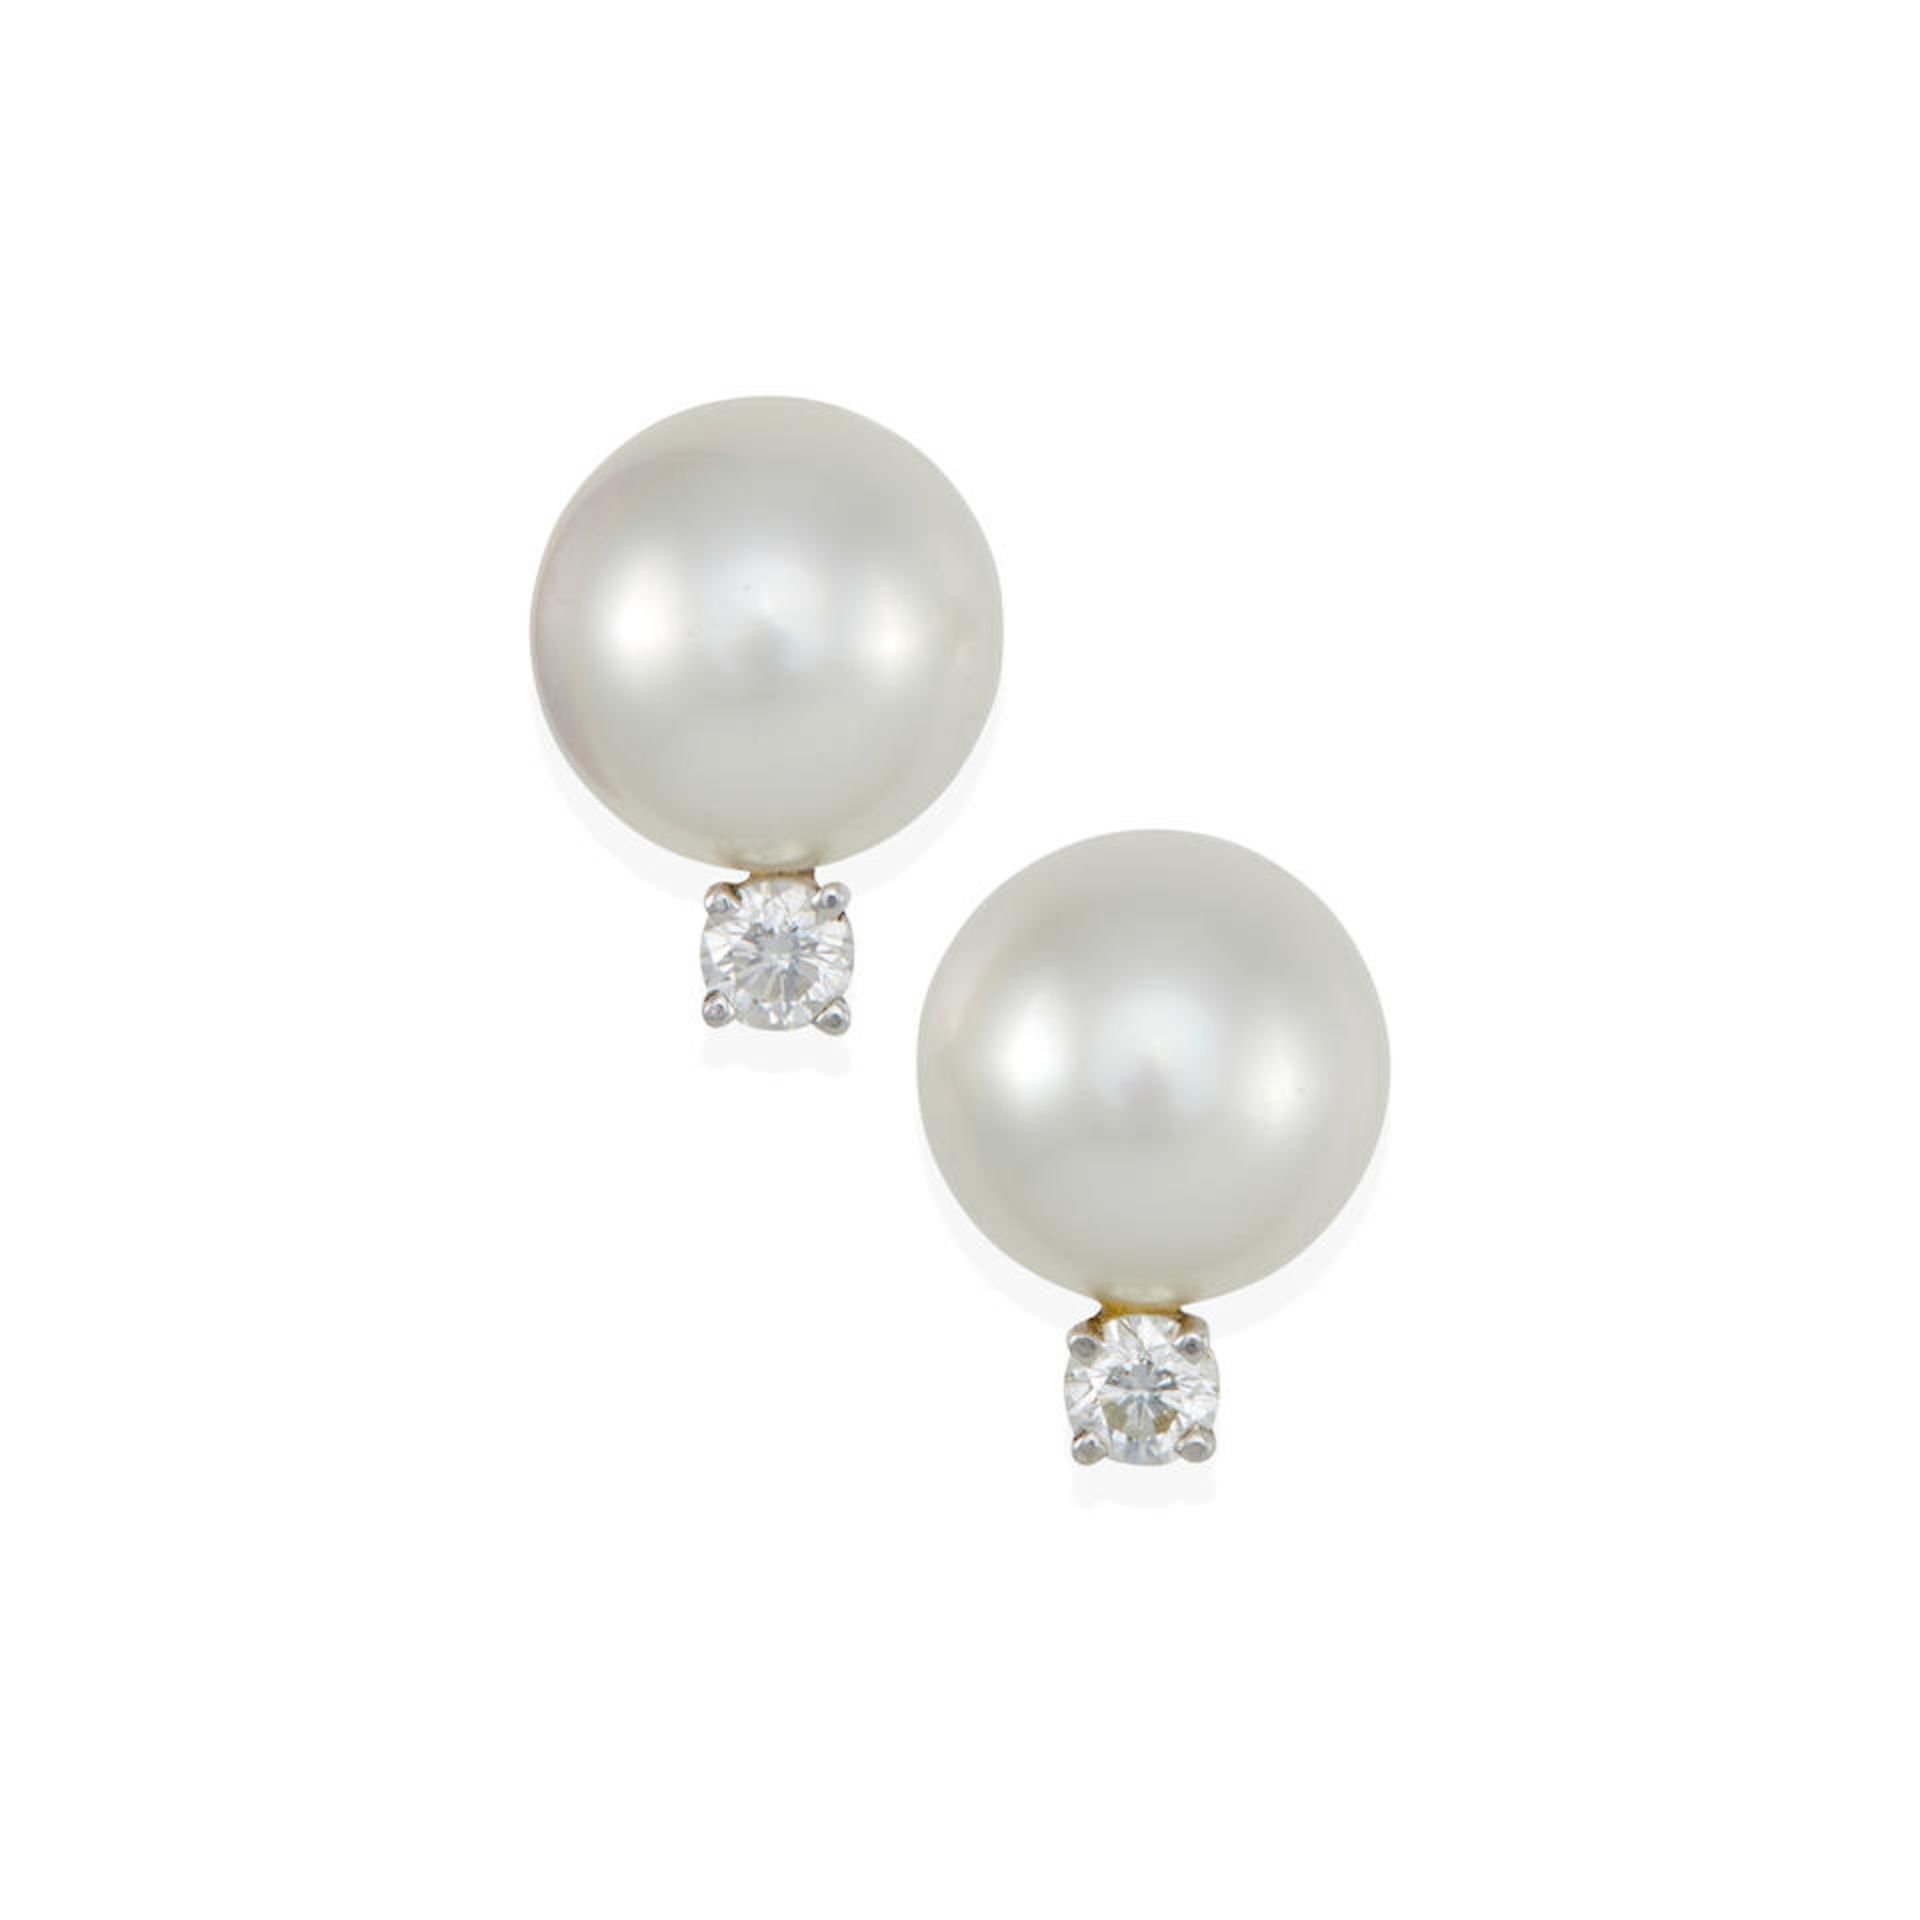 A PAIR OF 14K WHITE GOLD, SOUTH SEA CULTURED PEARL, AND DIAMOND STUD EARRINGS